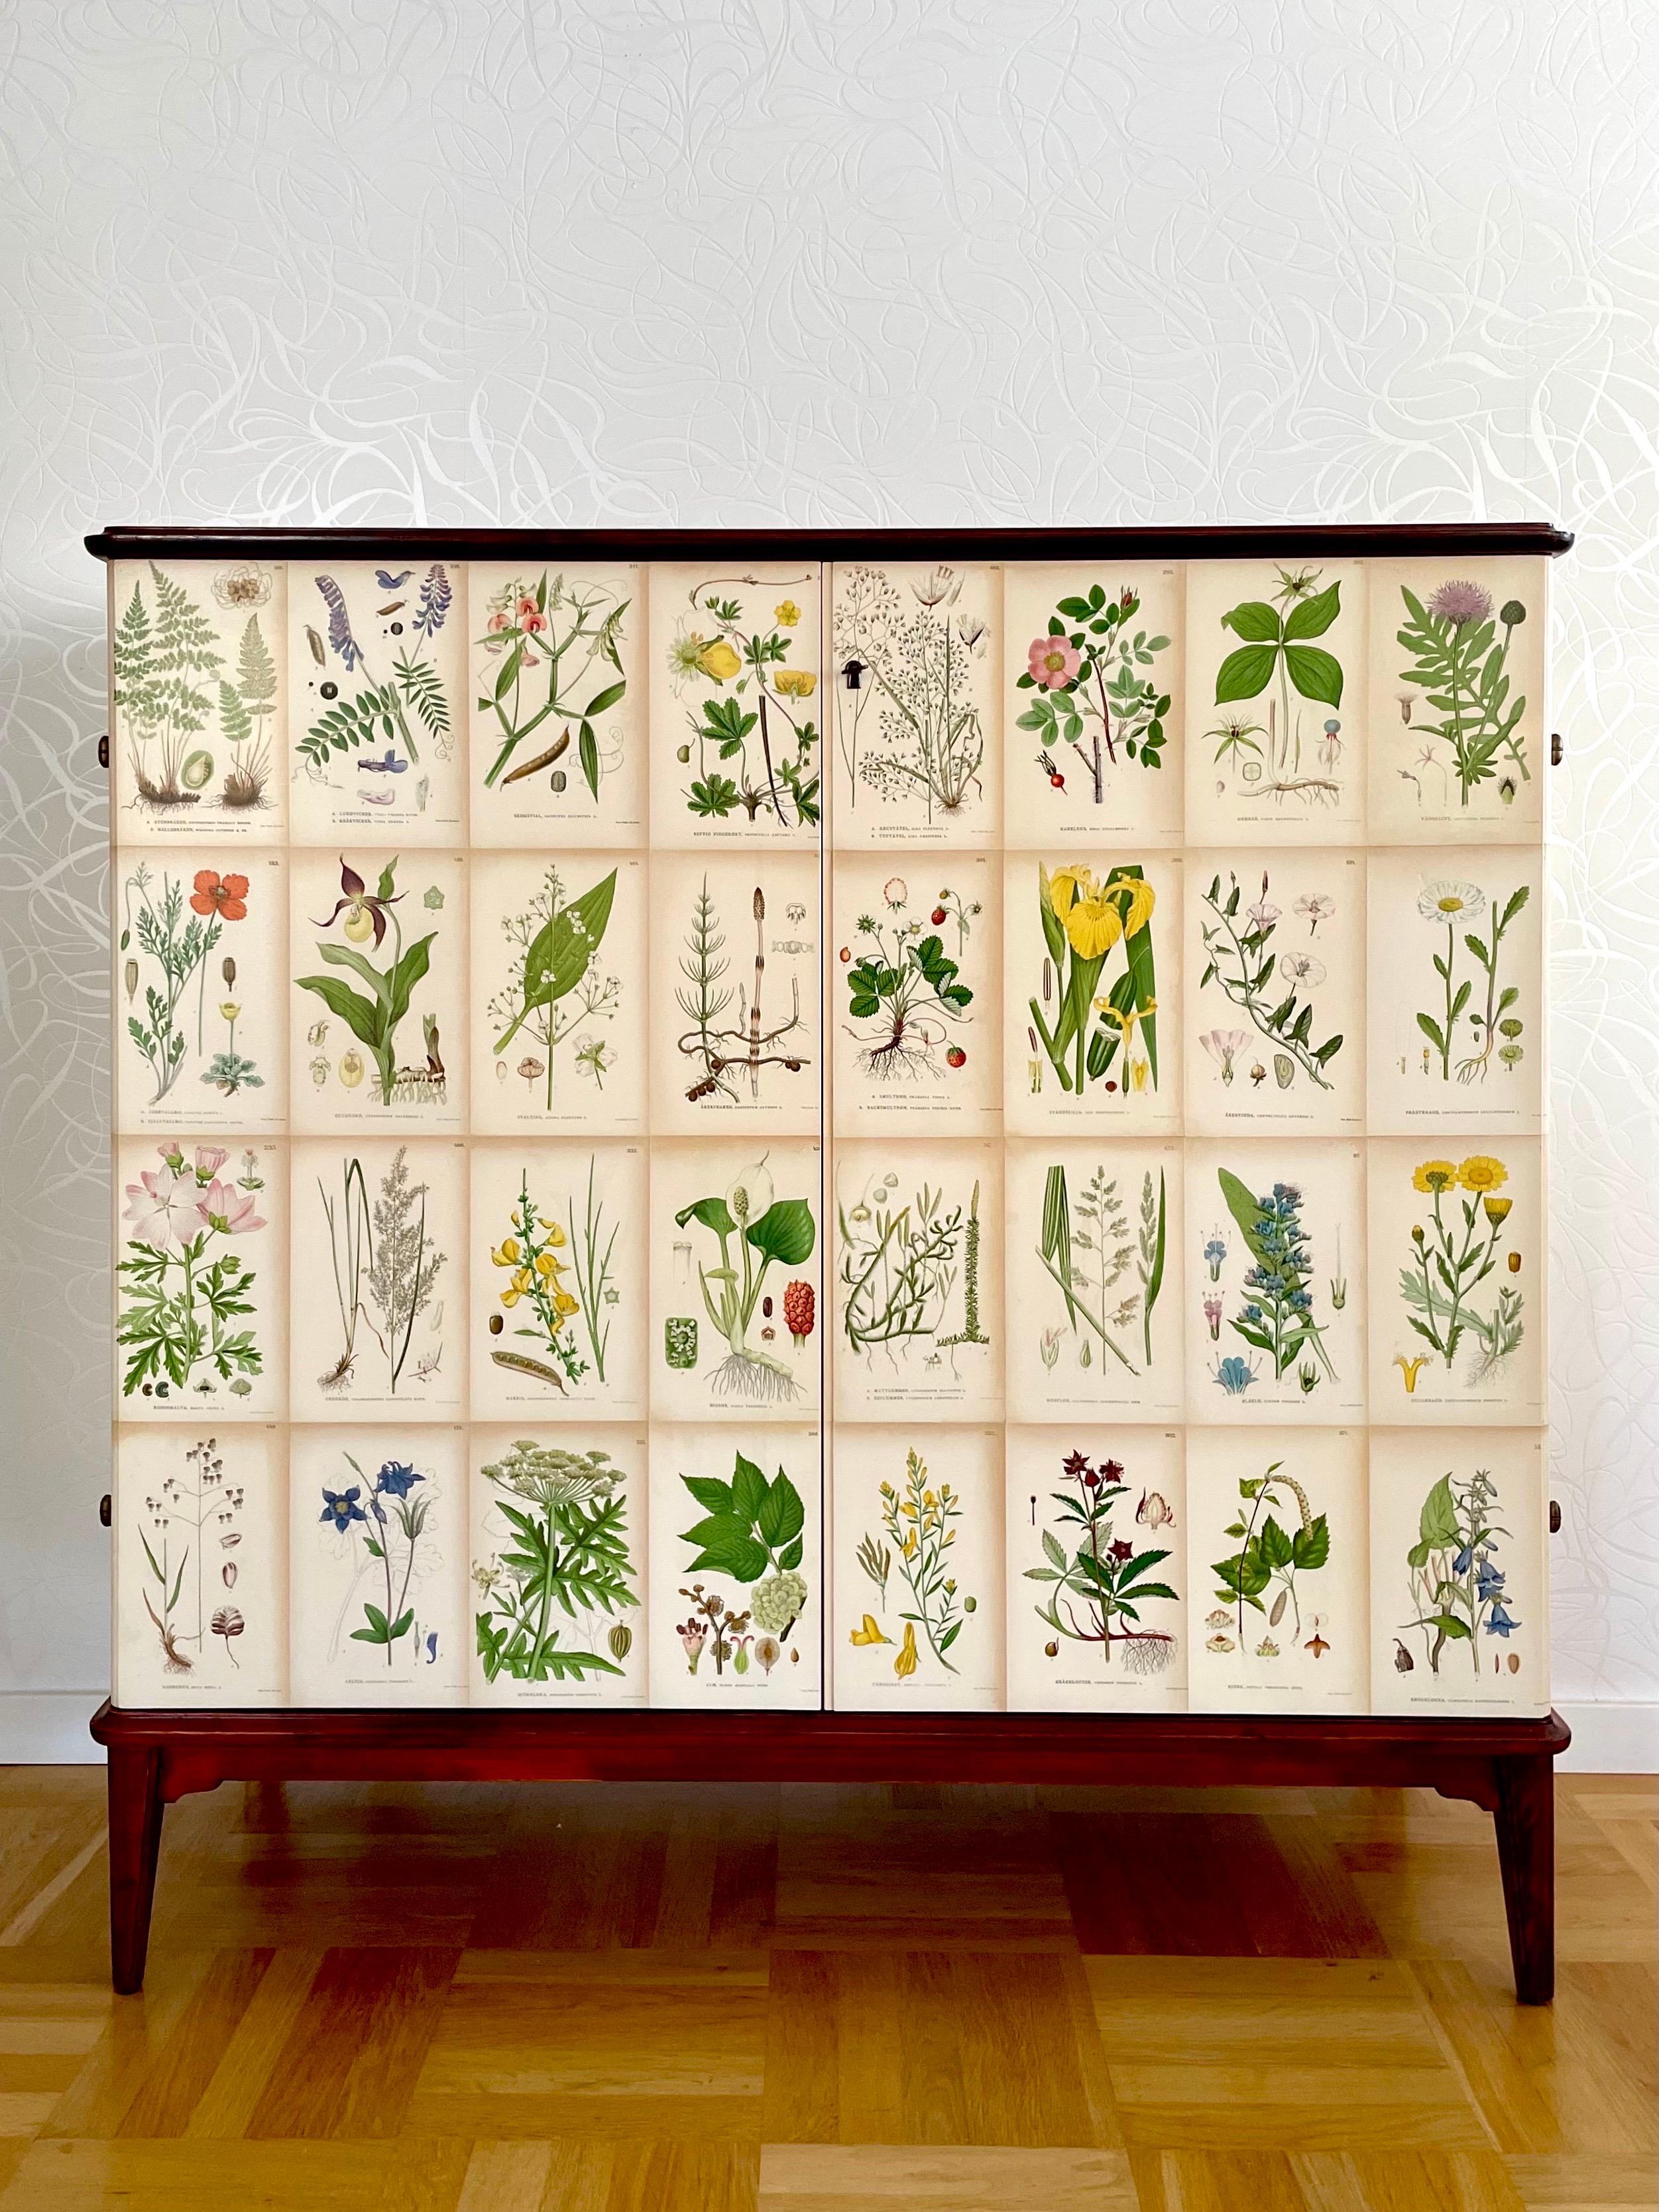 This is the Swedish Modern mahogny cabinet decorated with antique floral lithographs in Josef Frank style, manufactured 1954. 

It comes with clear coat mahogany veneered top, doors and sides decorated with pages from an antique botanical